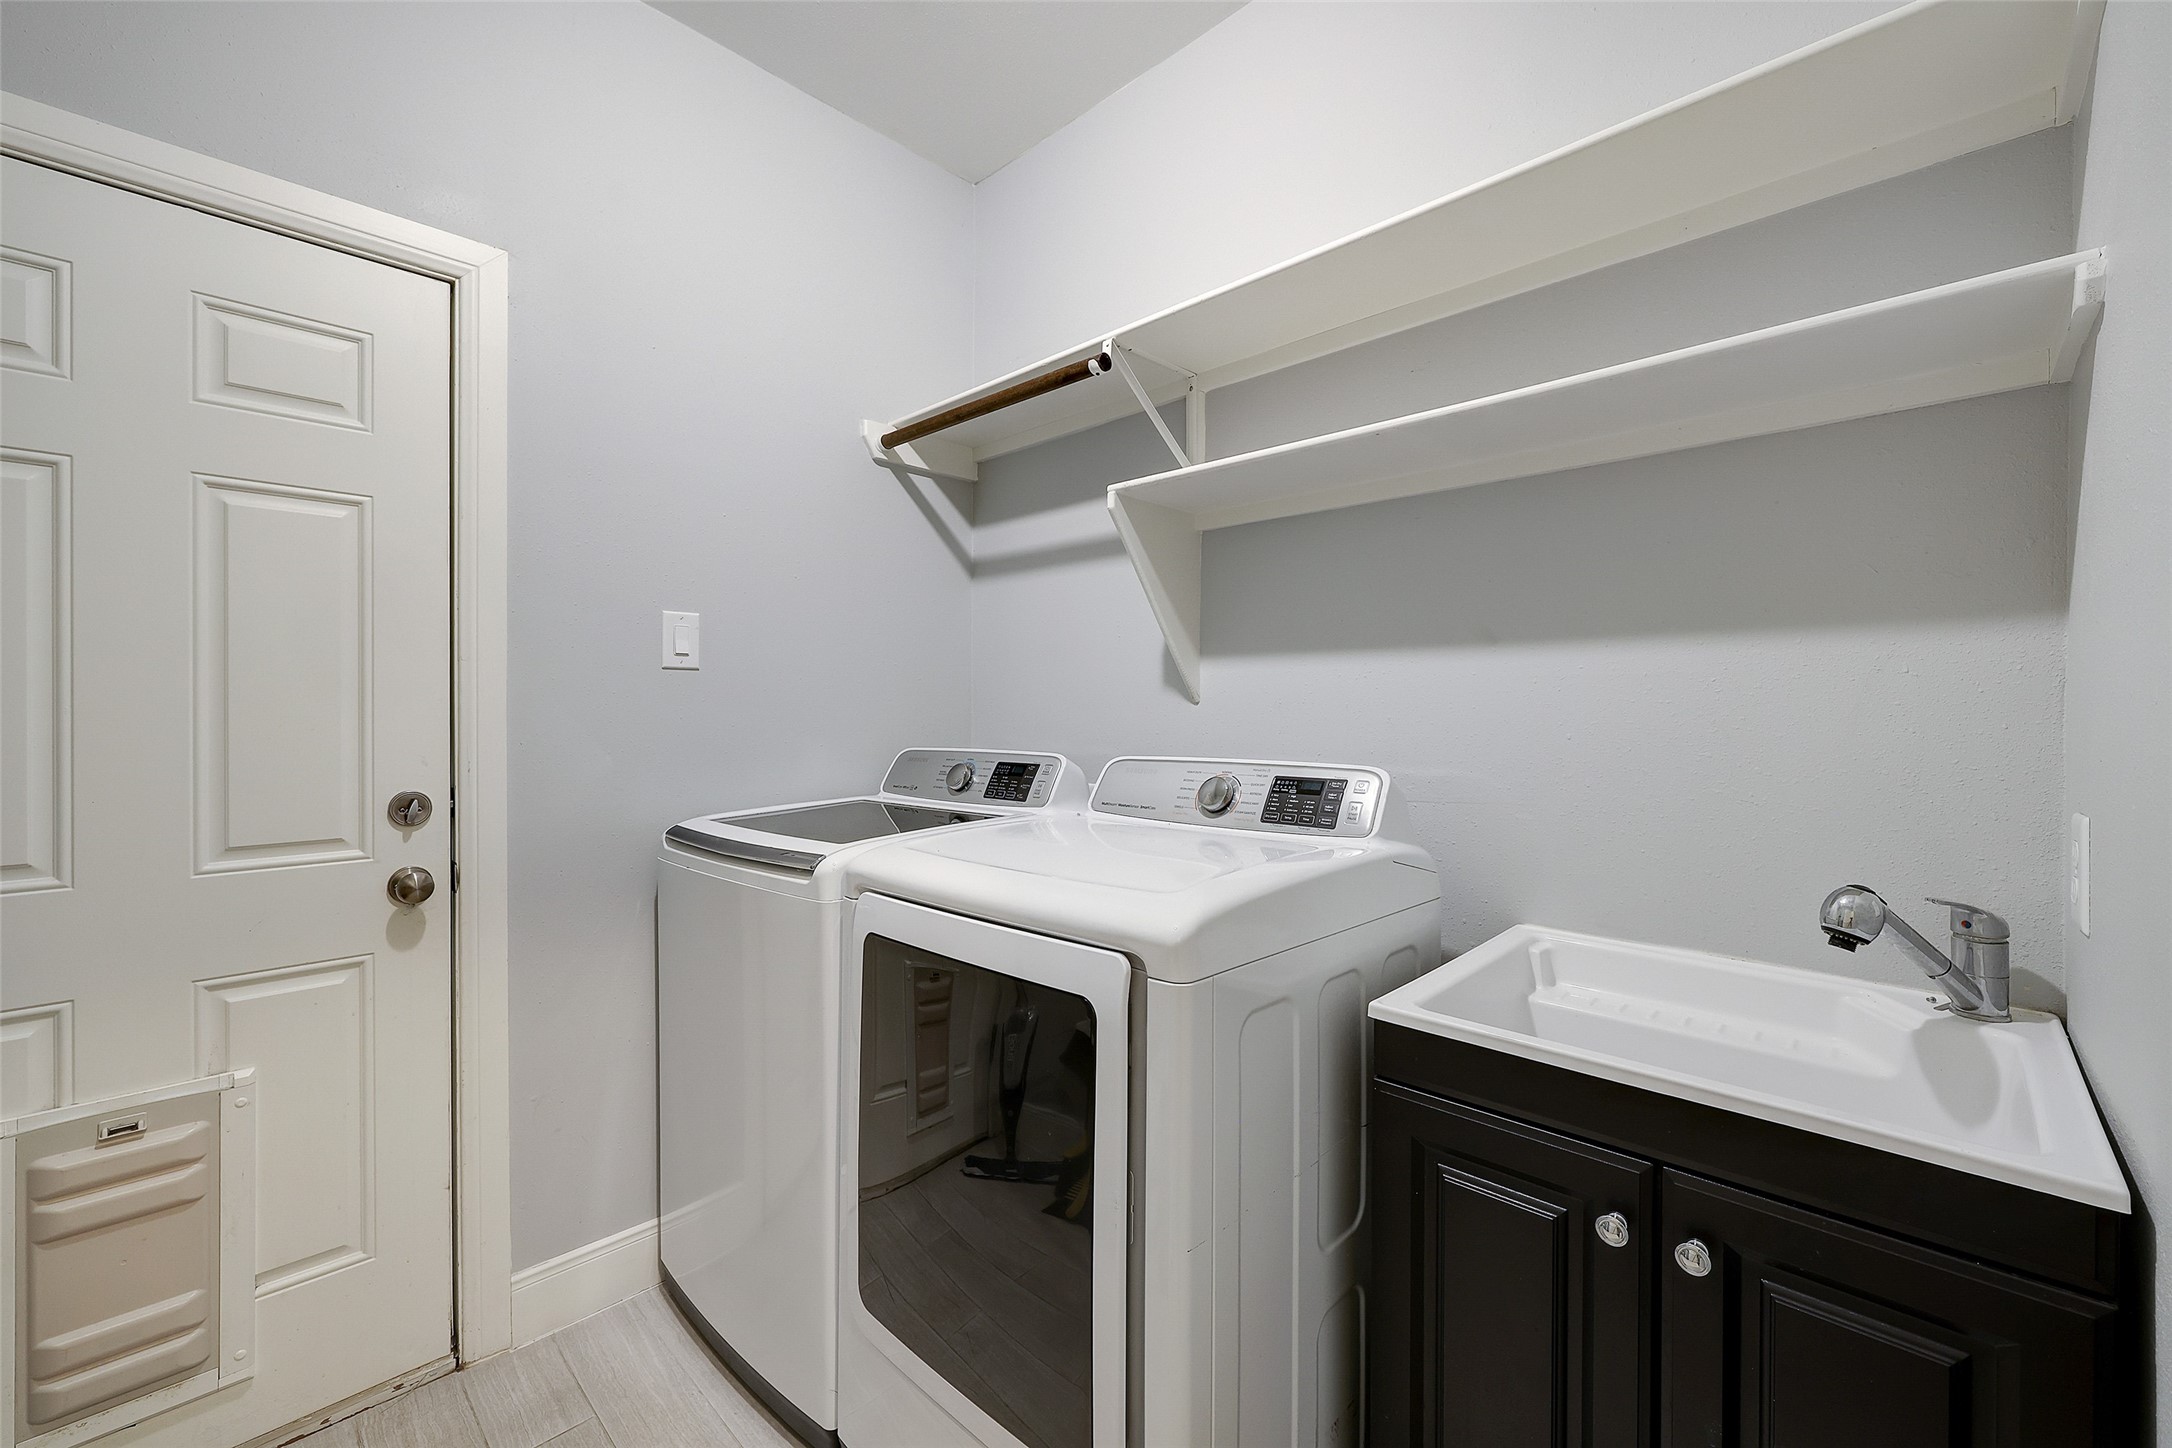 Utility room located in house with sink and access to outdoors.